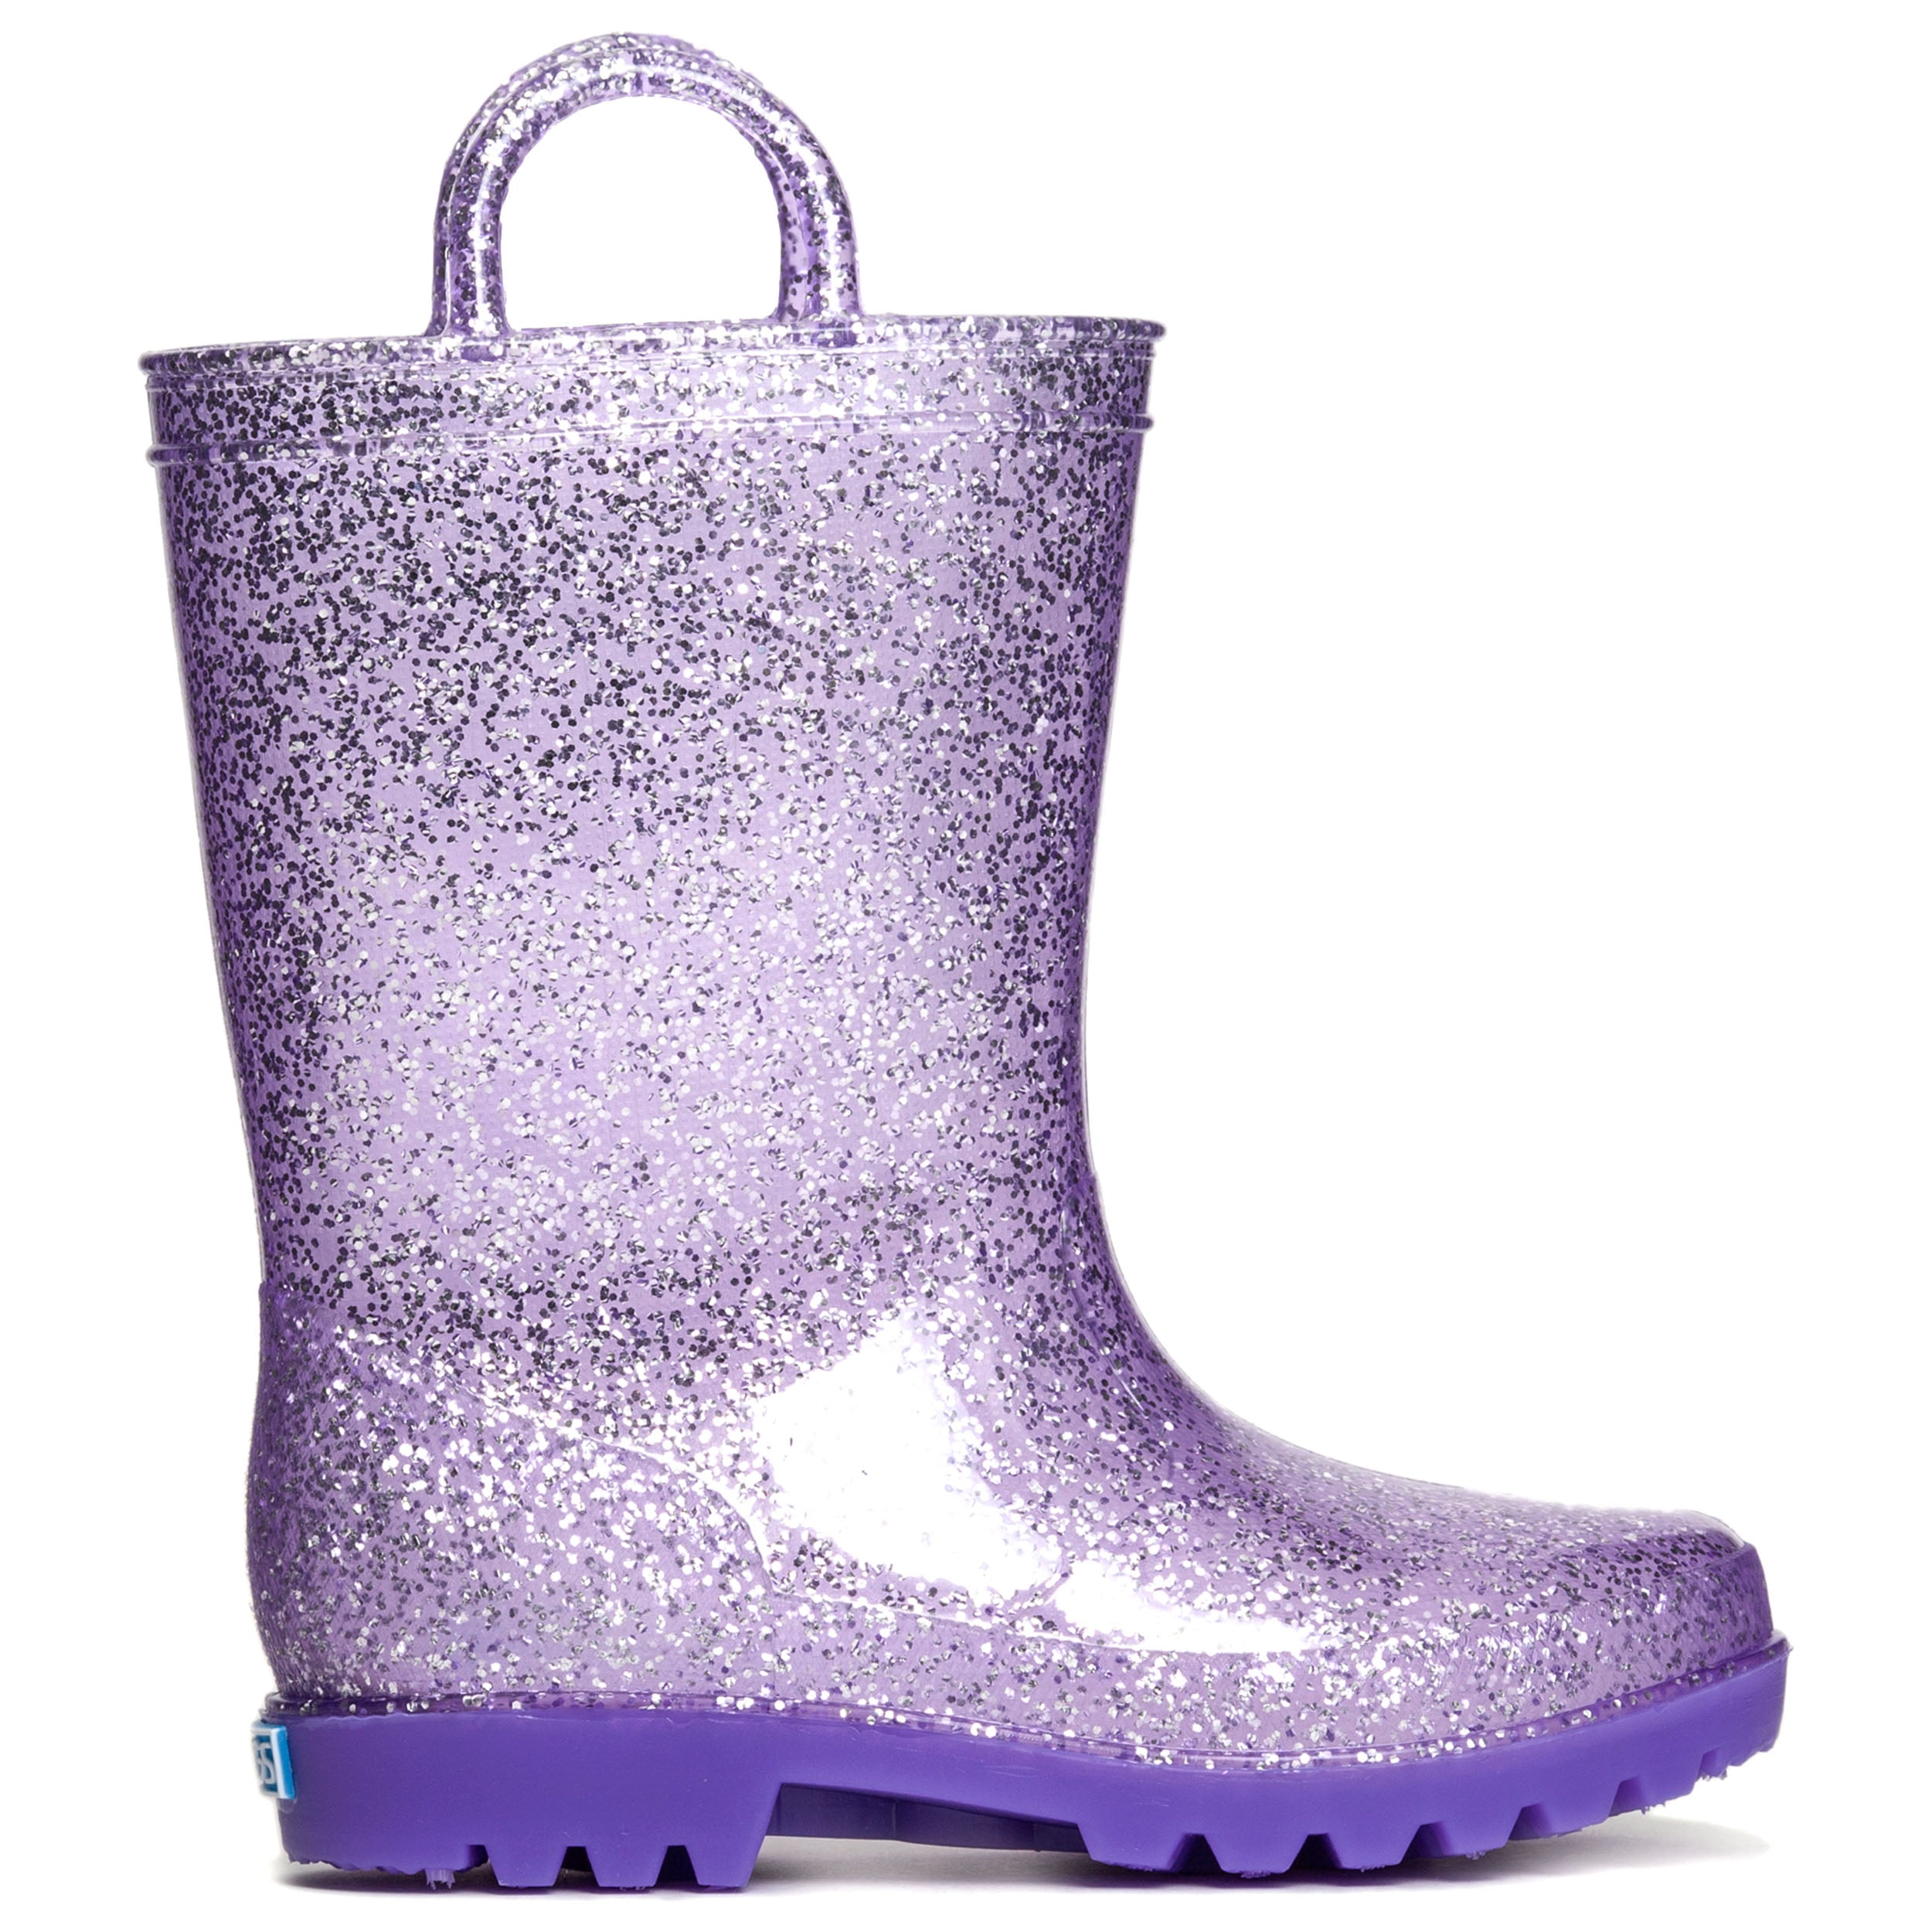 ZOOGS Kids Glitter Rain Boots for Girls and Toddlers